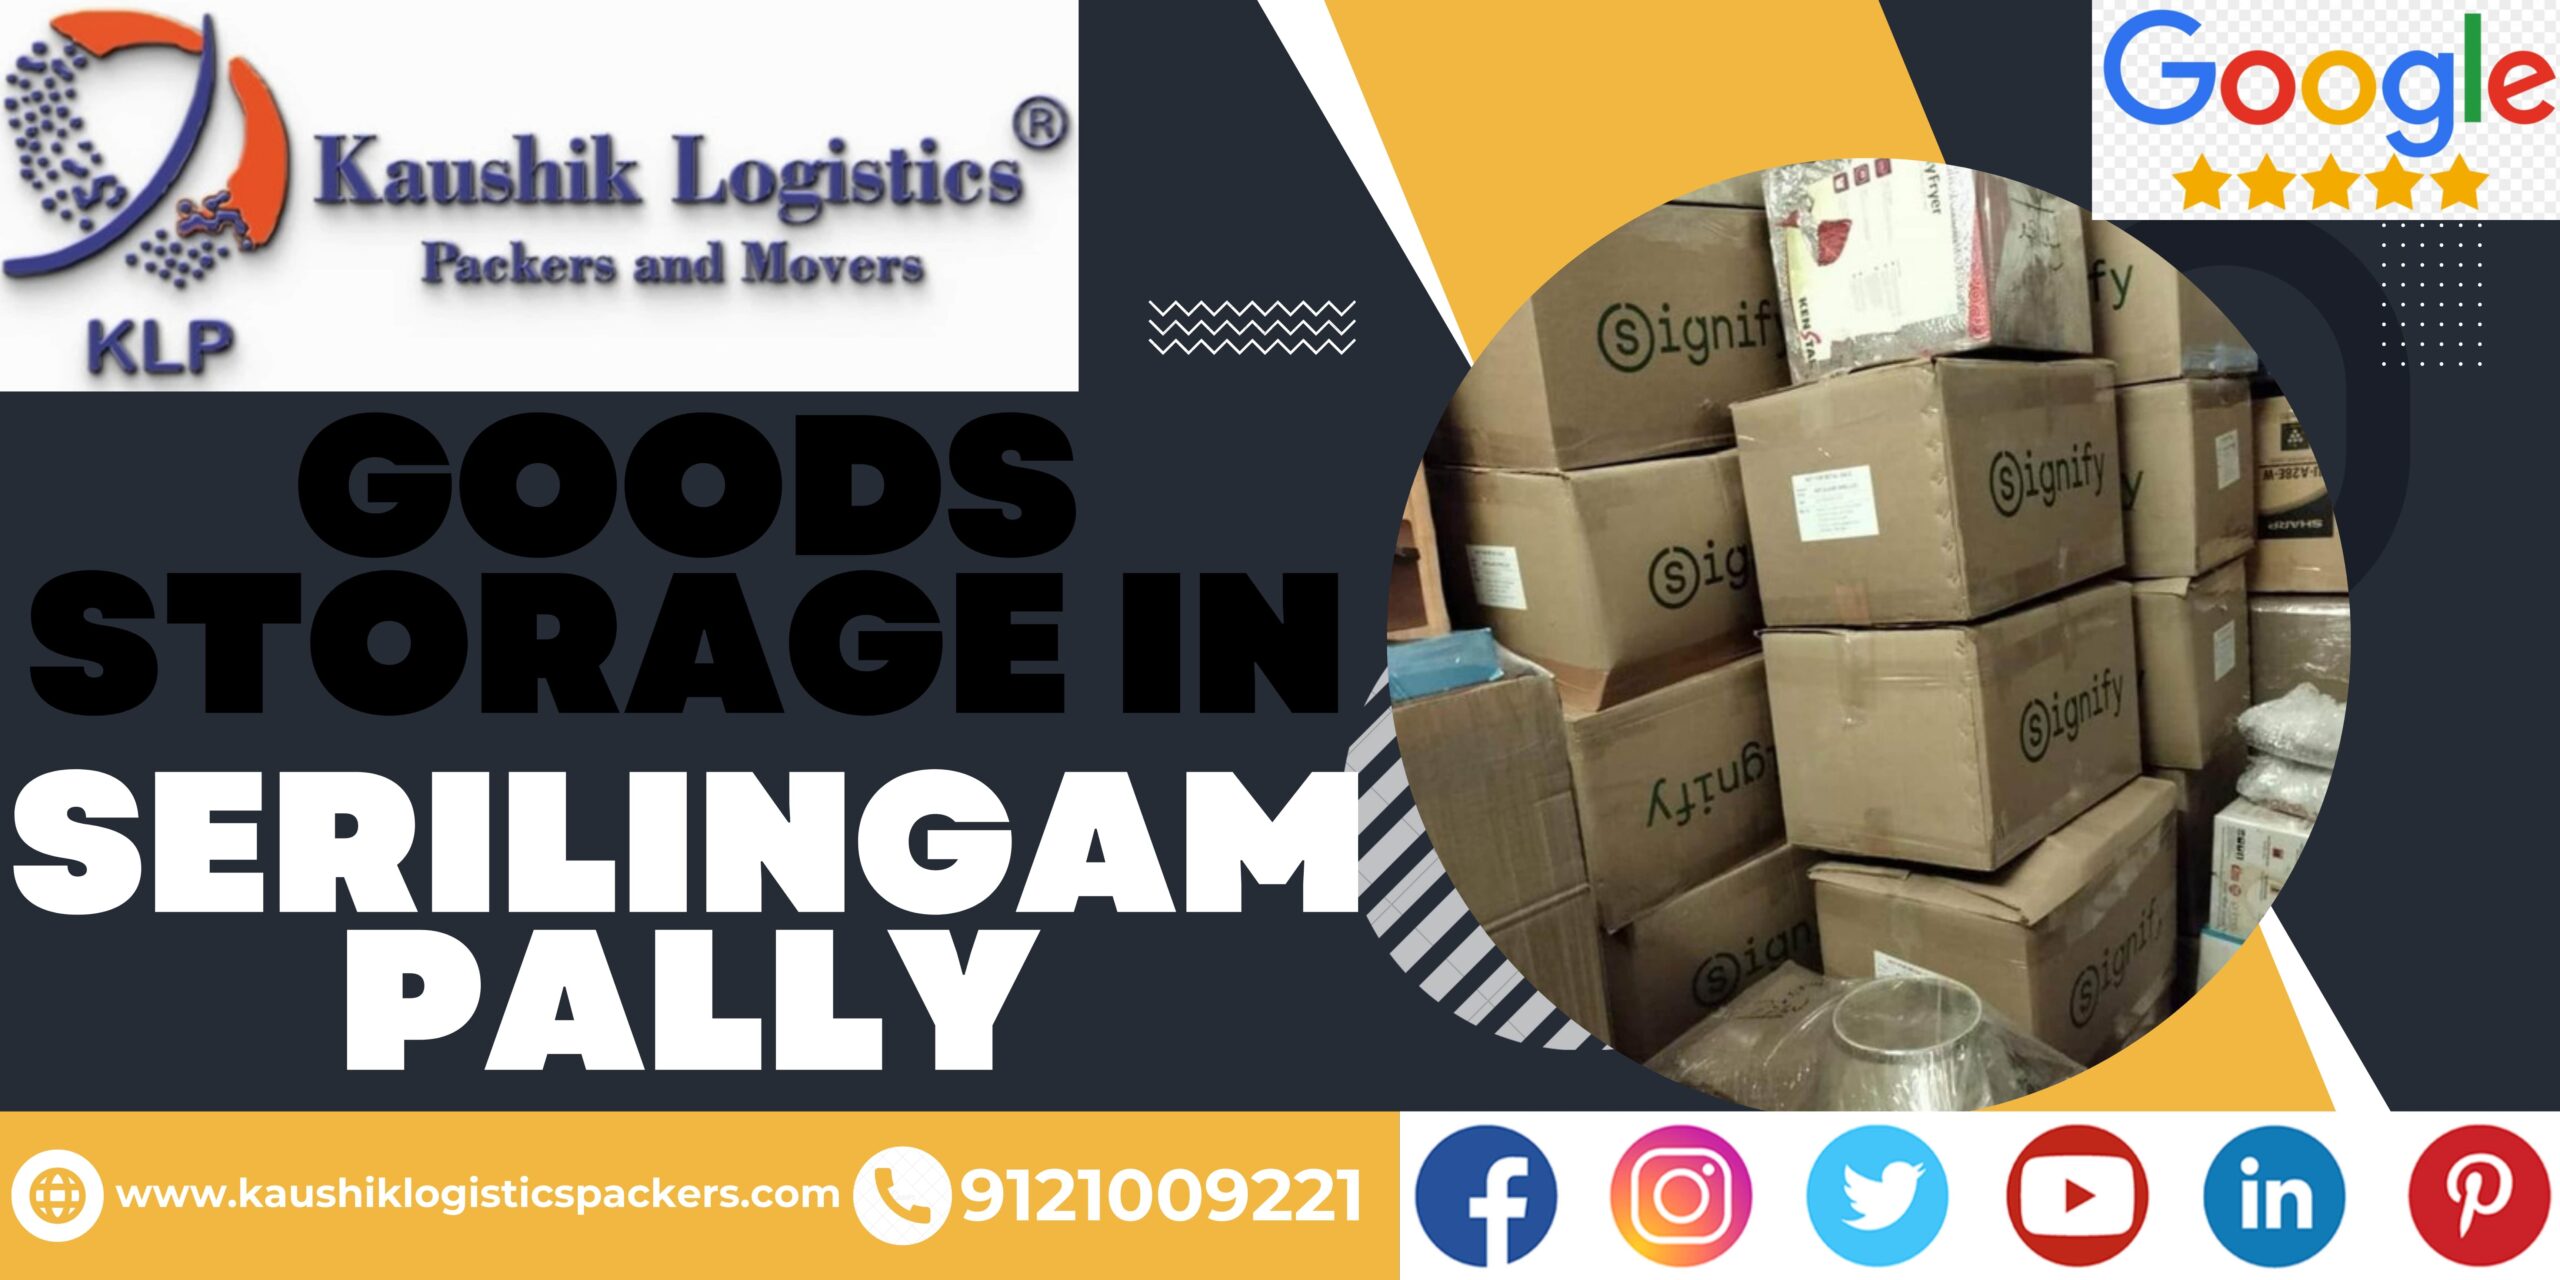 Packers and Movers In Serilingampally